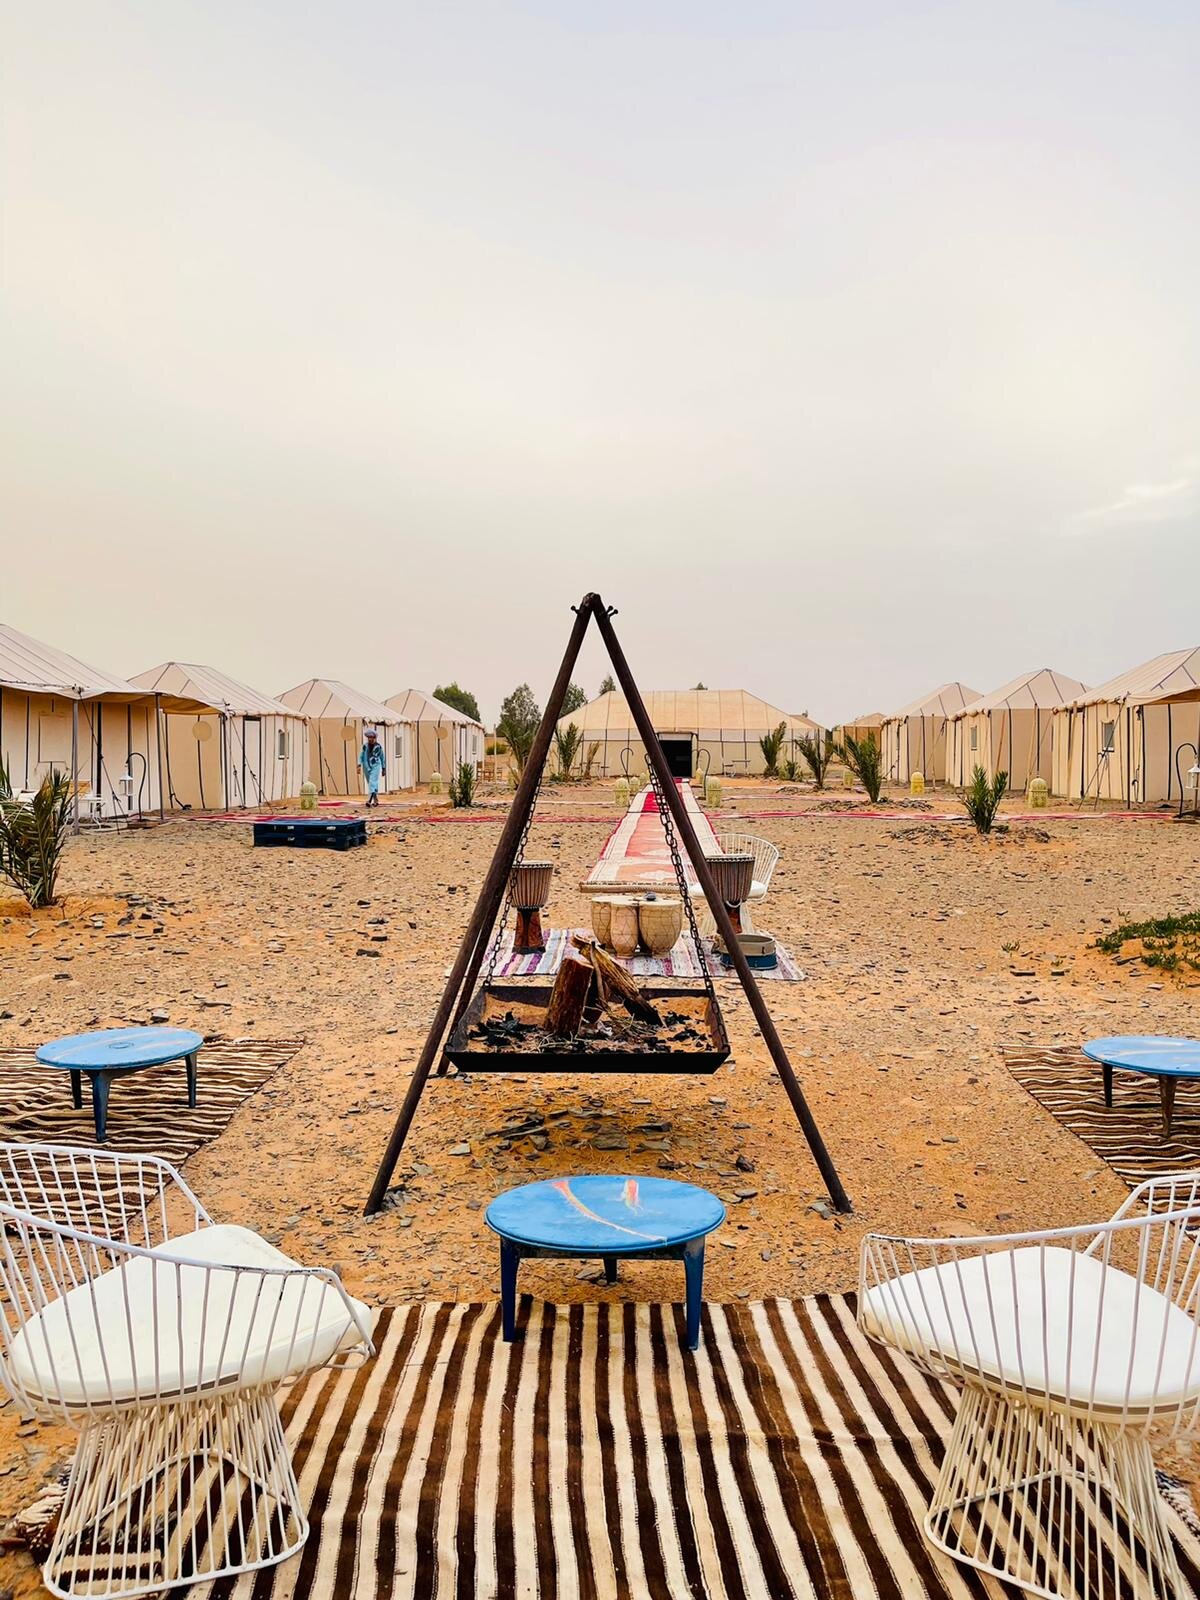 Kach Solo Travels in 2021 Berber-style luxurious Desert Camp in Merzouga, Morocco!23.jpg